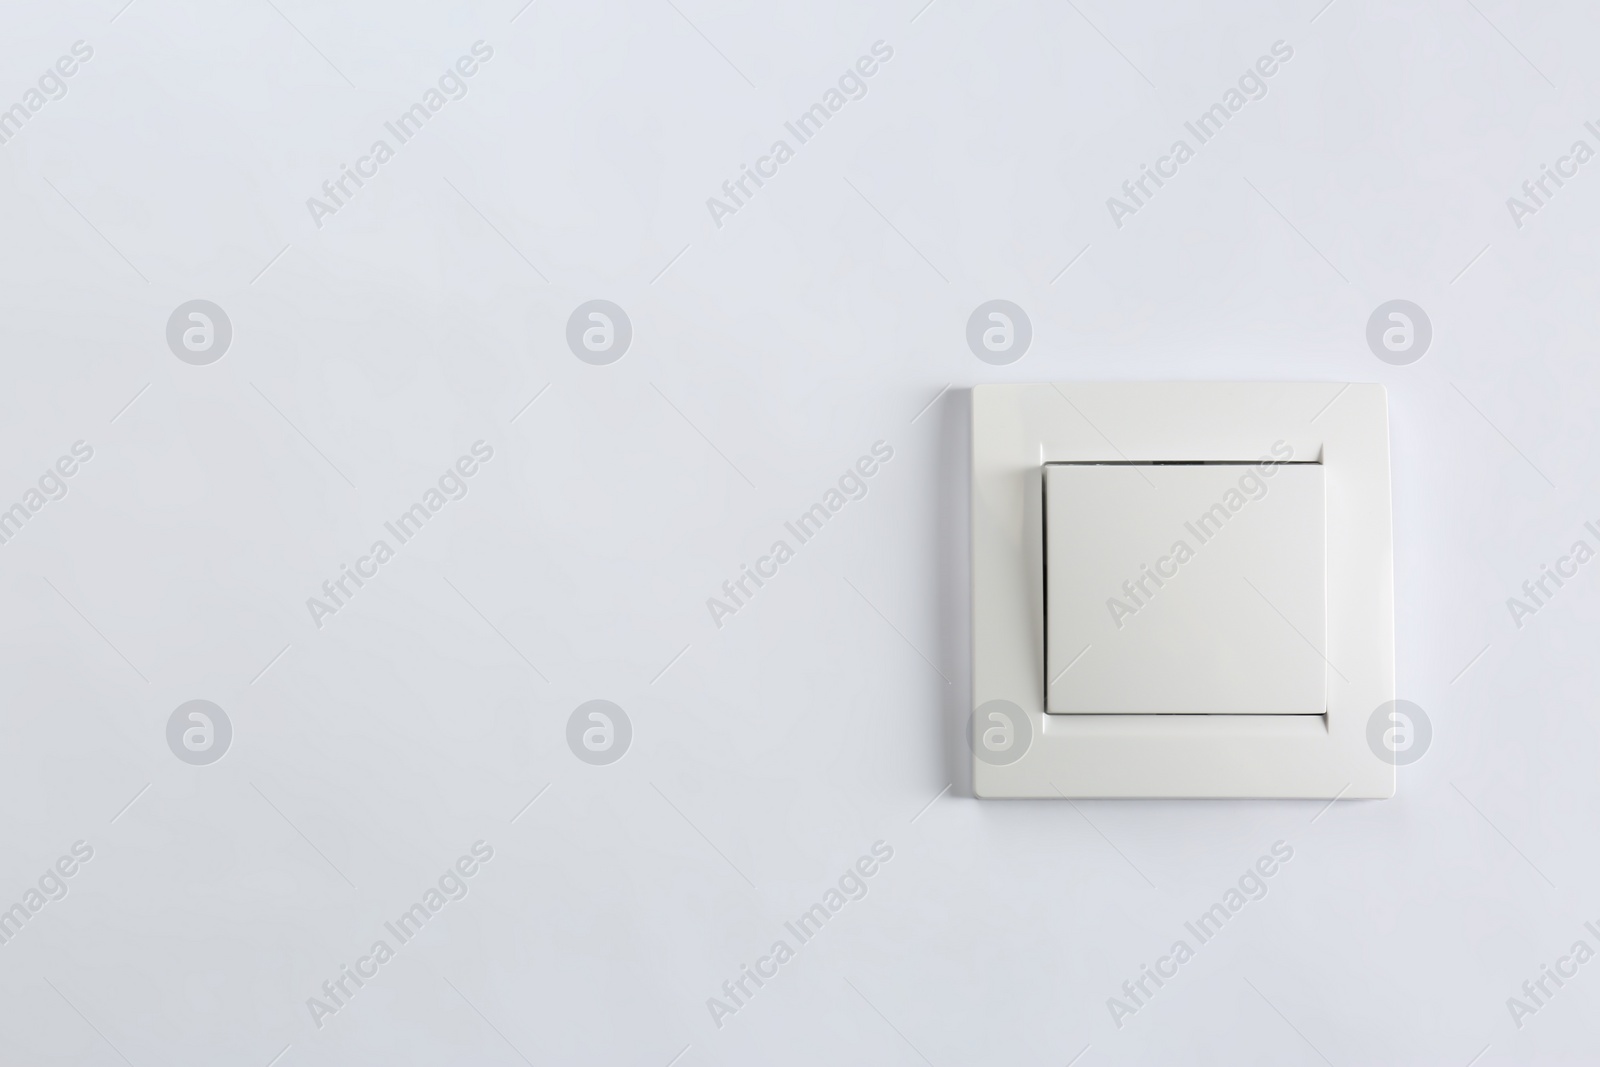 Photo of Light switch on white background. Electrician's equipment